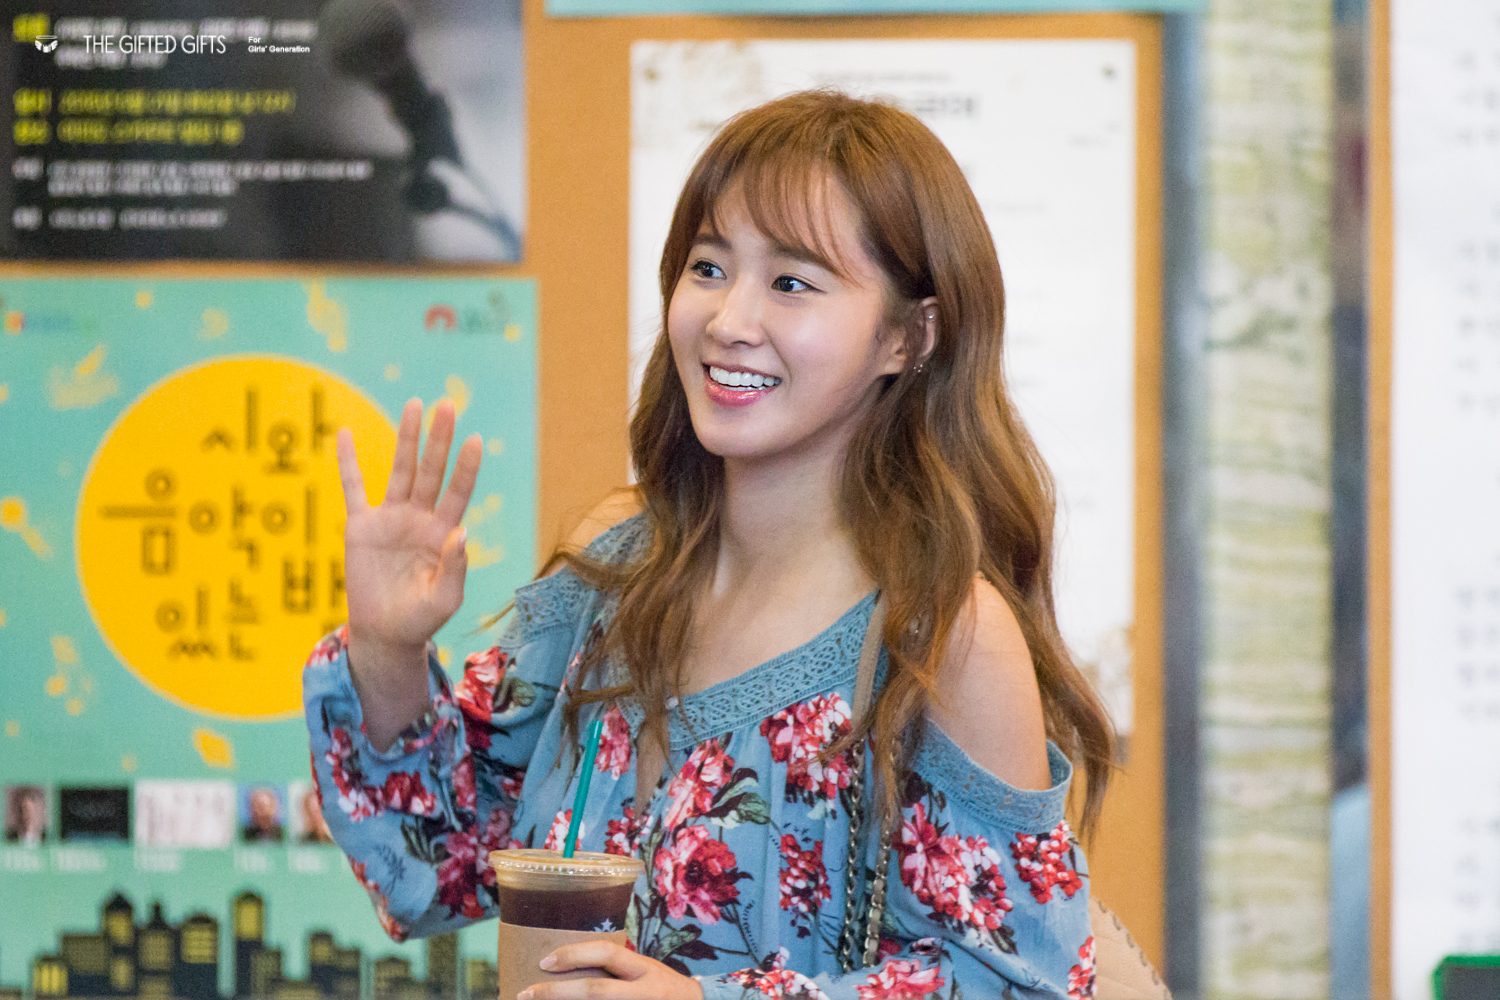 160626 Kiss the Radio 유리 by TheGiftedGifts bittersoursweet (1).jpg